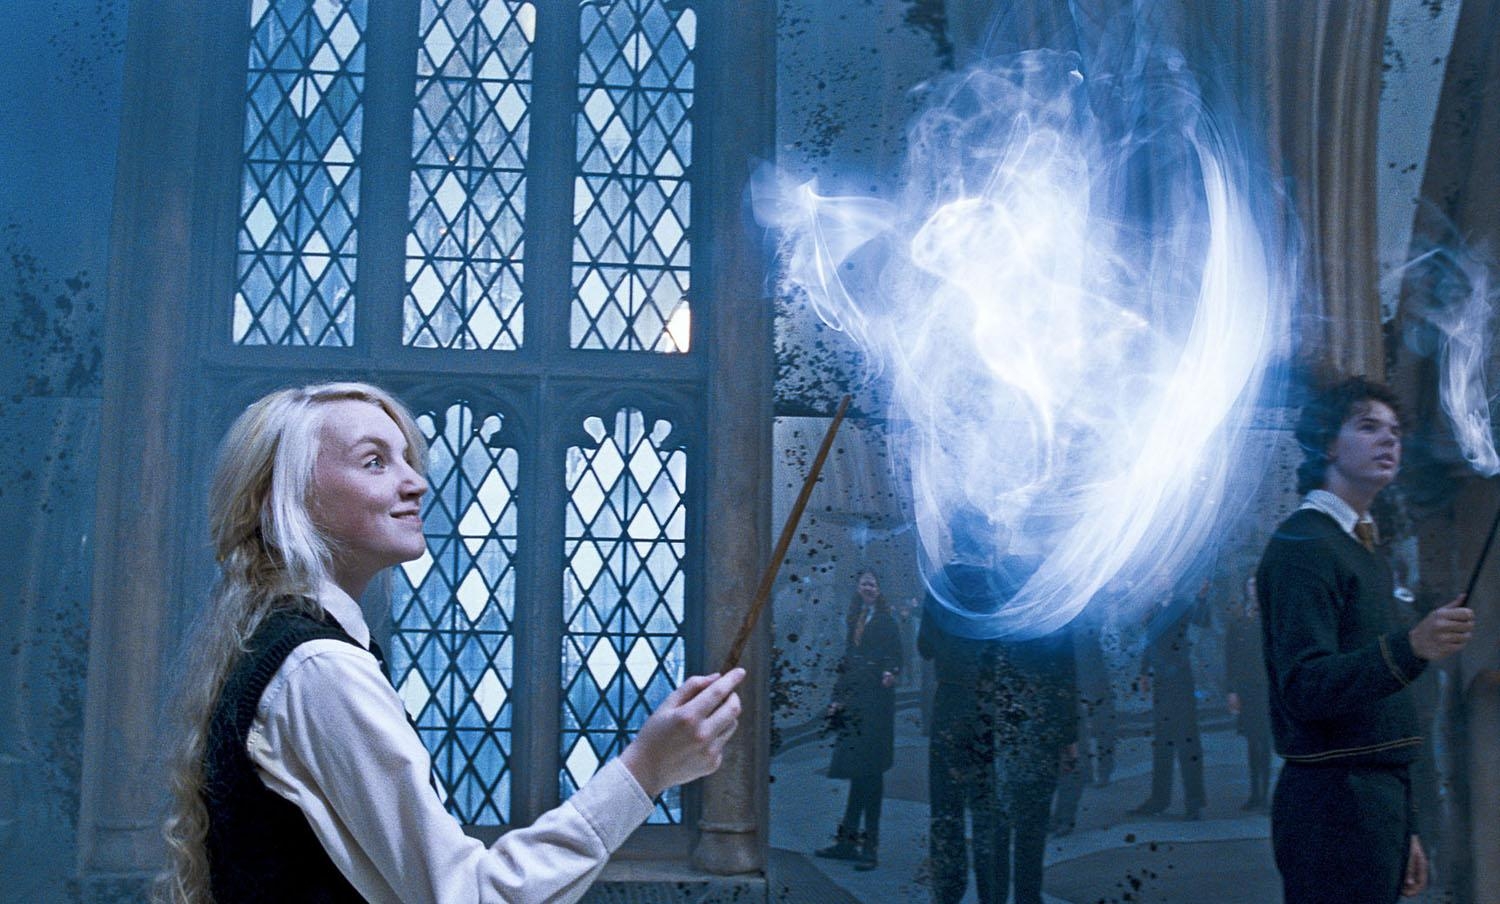 harry potter harry potter and the order of the phoenix luna lovegood evanna lynch patronus 1500x9 High Quality Wallpaper, High Definition Wallpaper